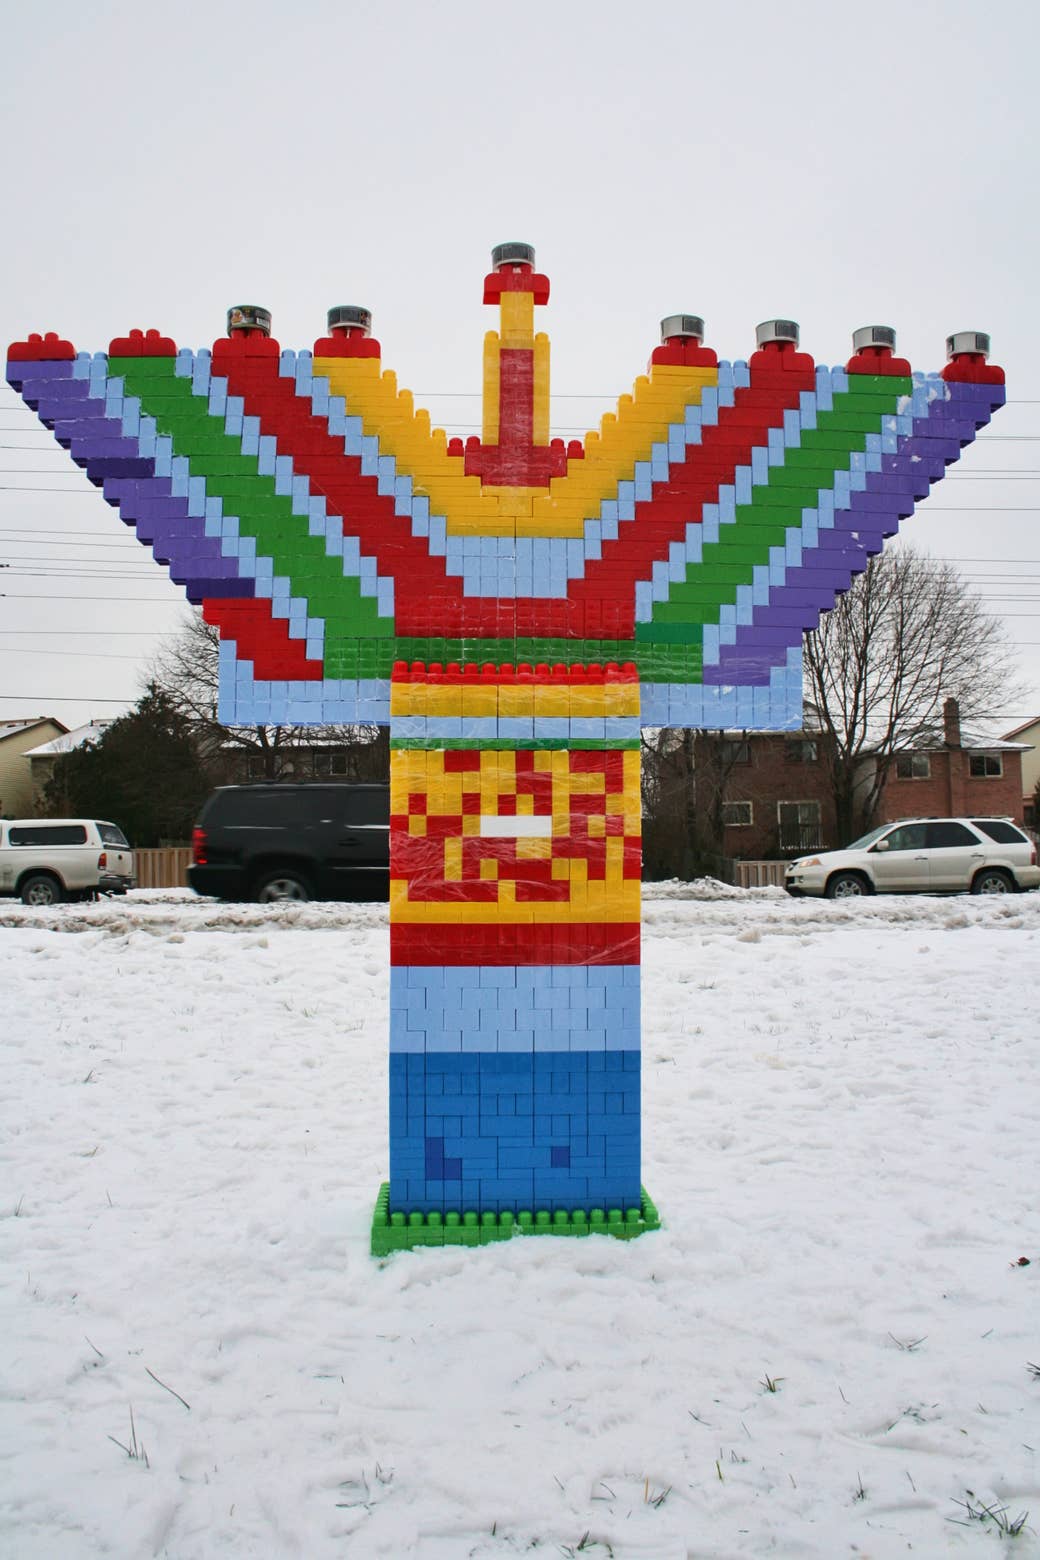 a giant menorah made of colorful blocks in the snow